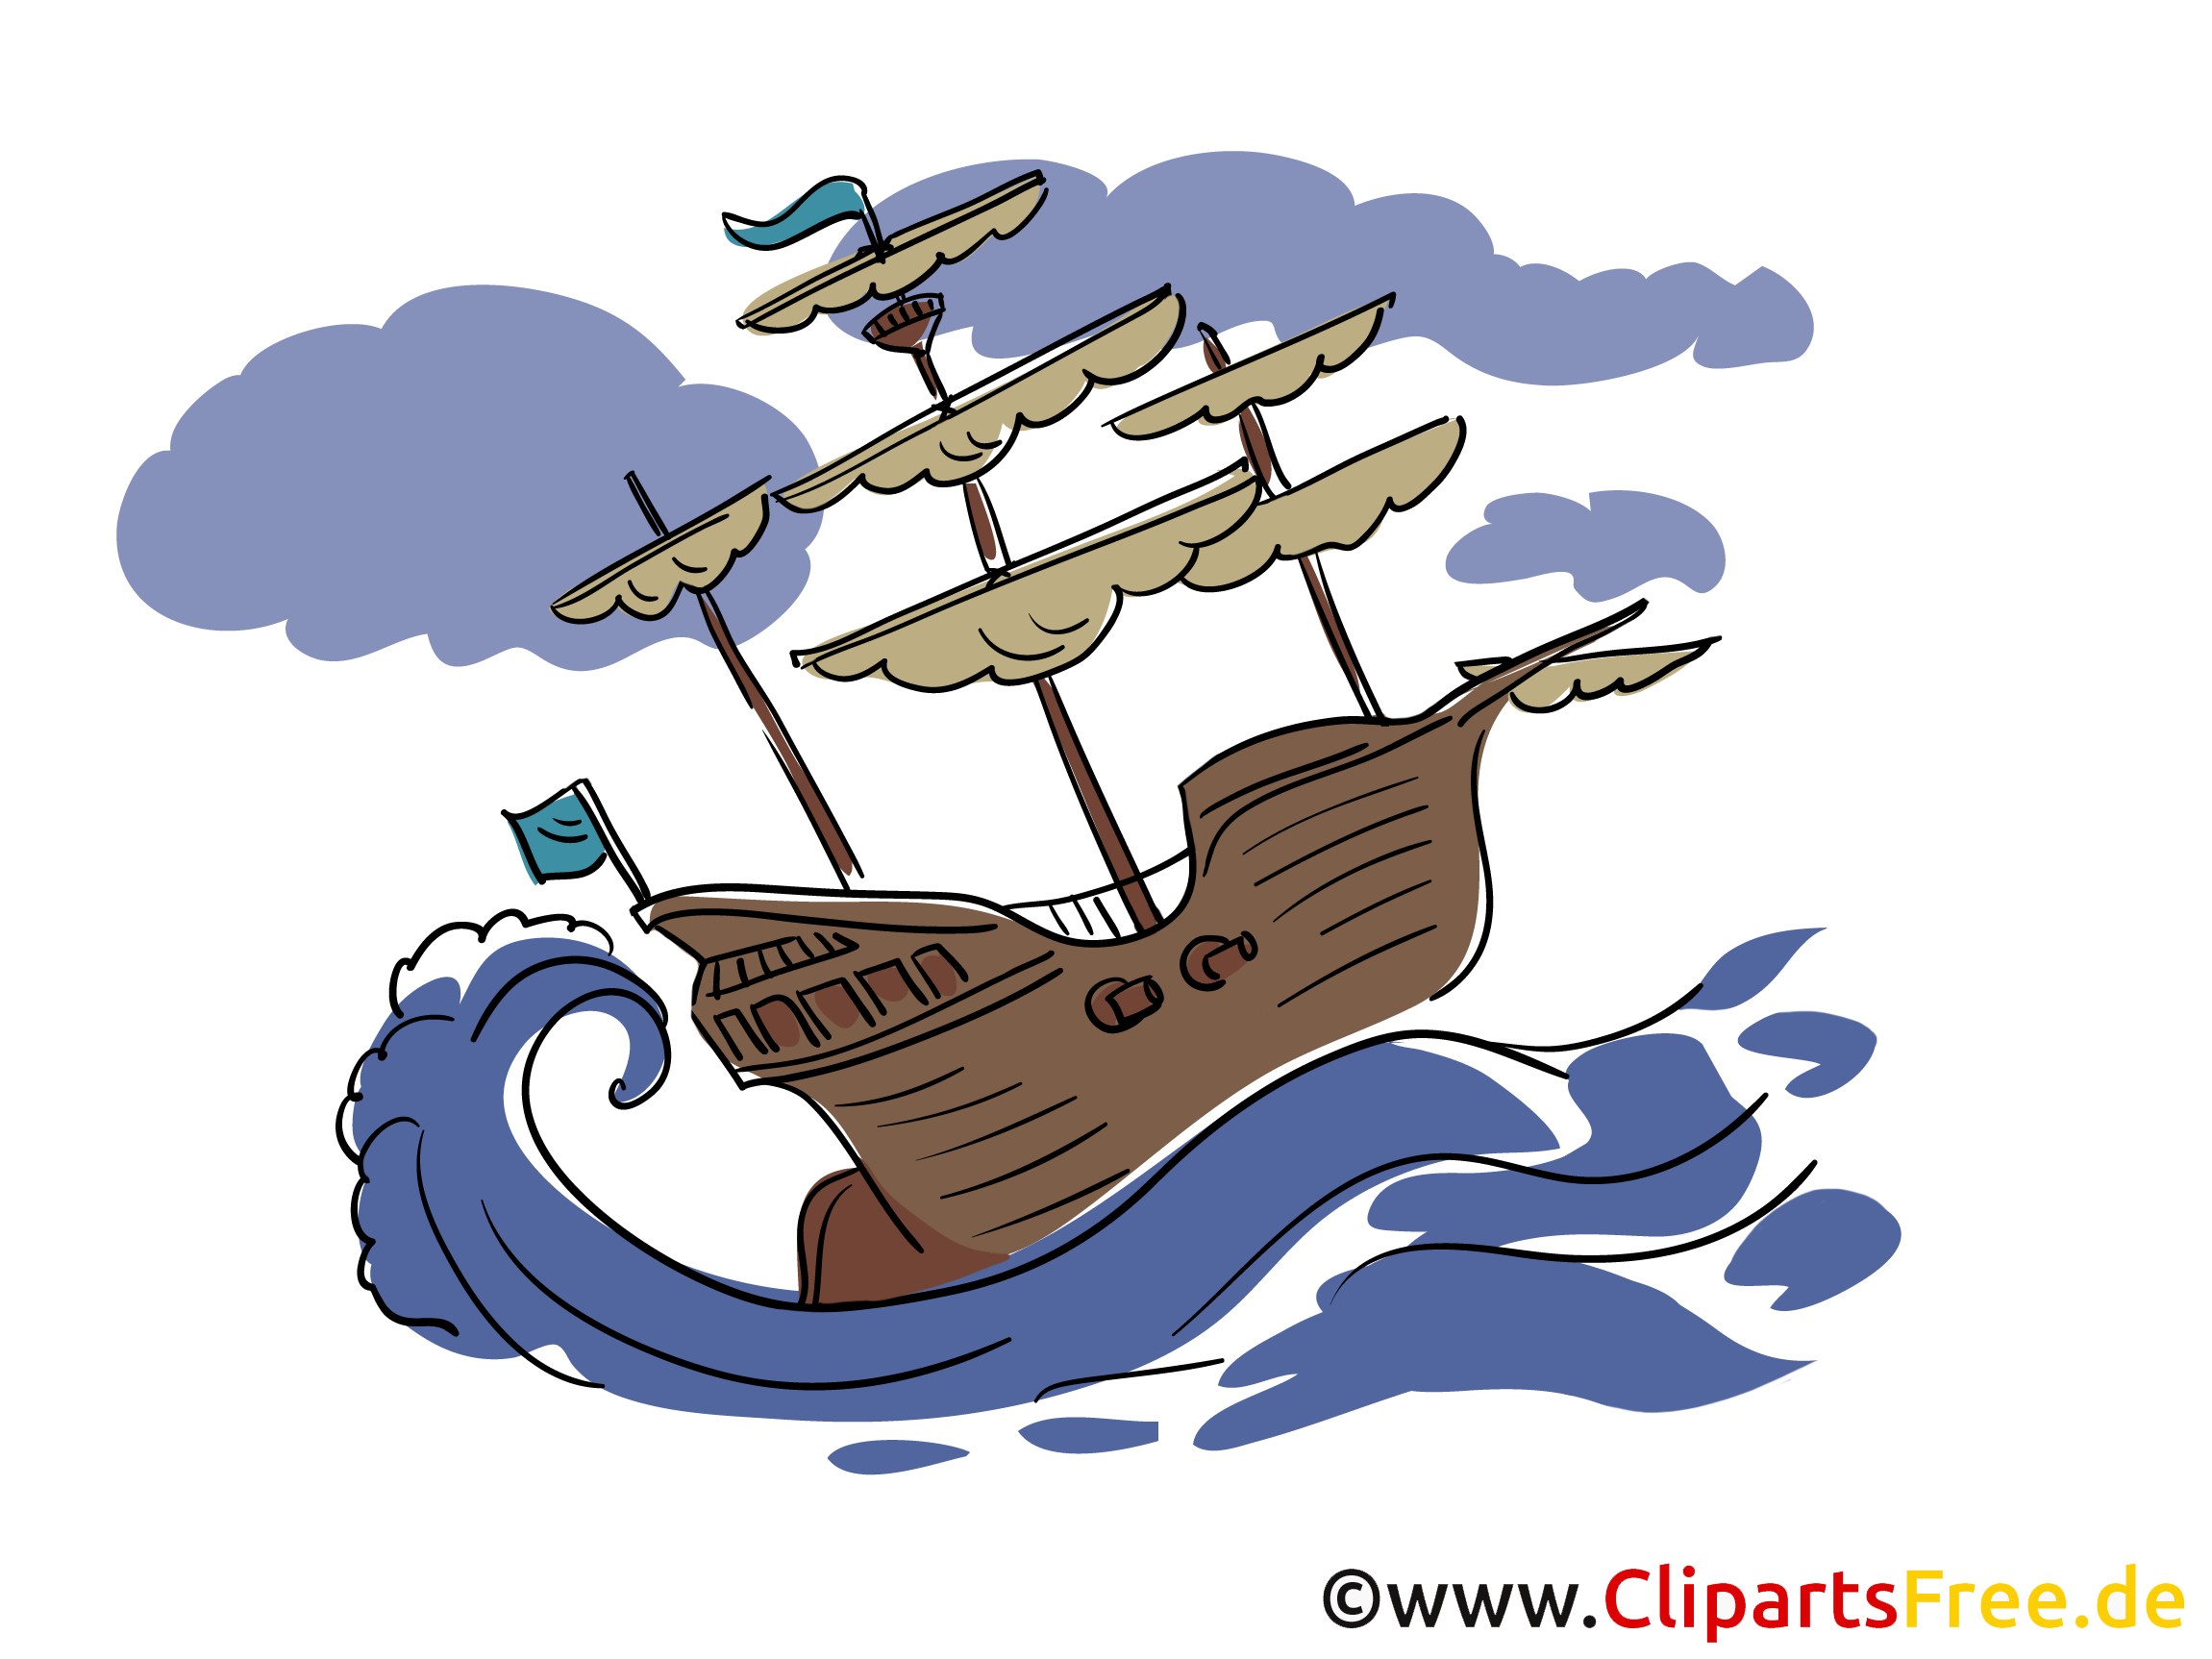 Clipart Title: Storm Clipart Ships in the Sea.